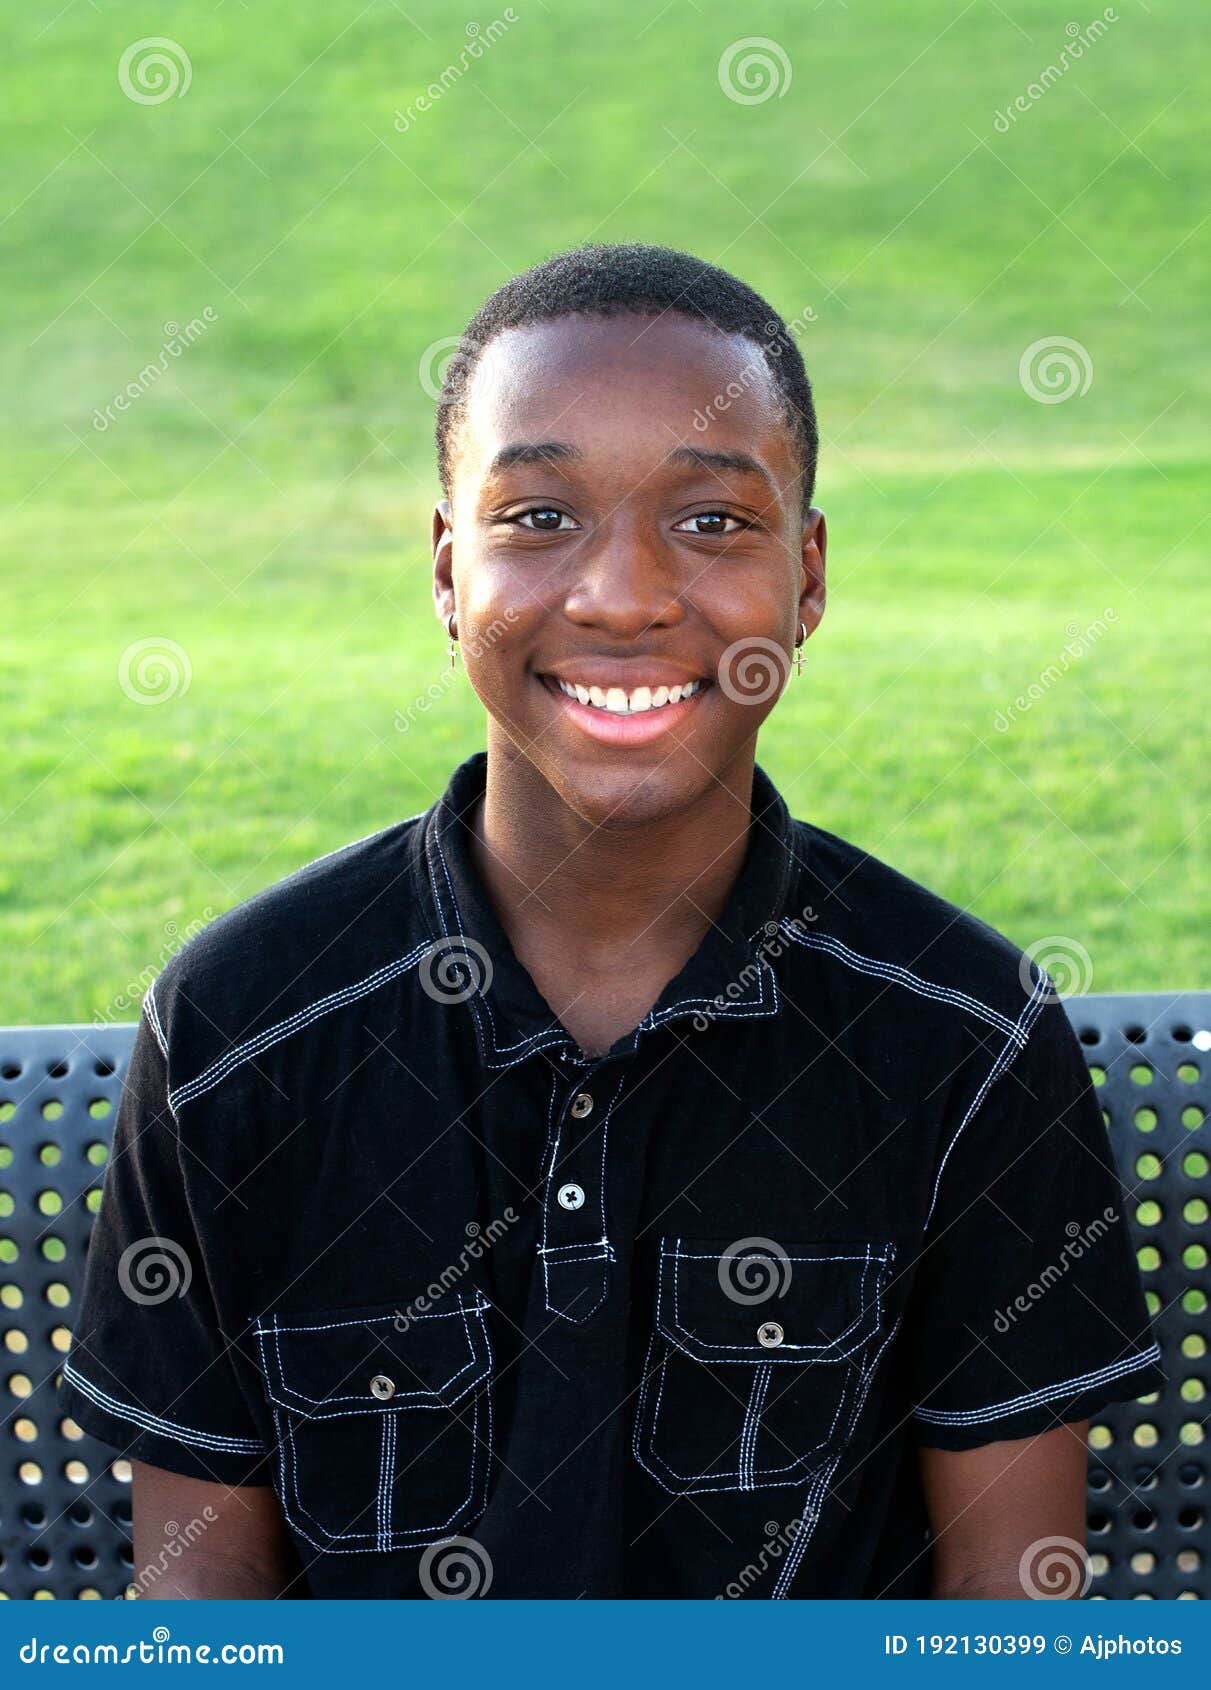 8 074 African Boy Teen Photos Free Royalty Free Stock Photos From Dreamstime